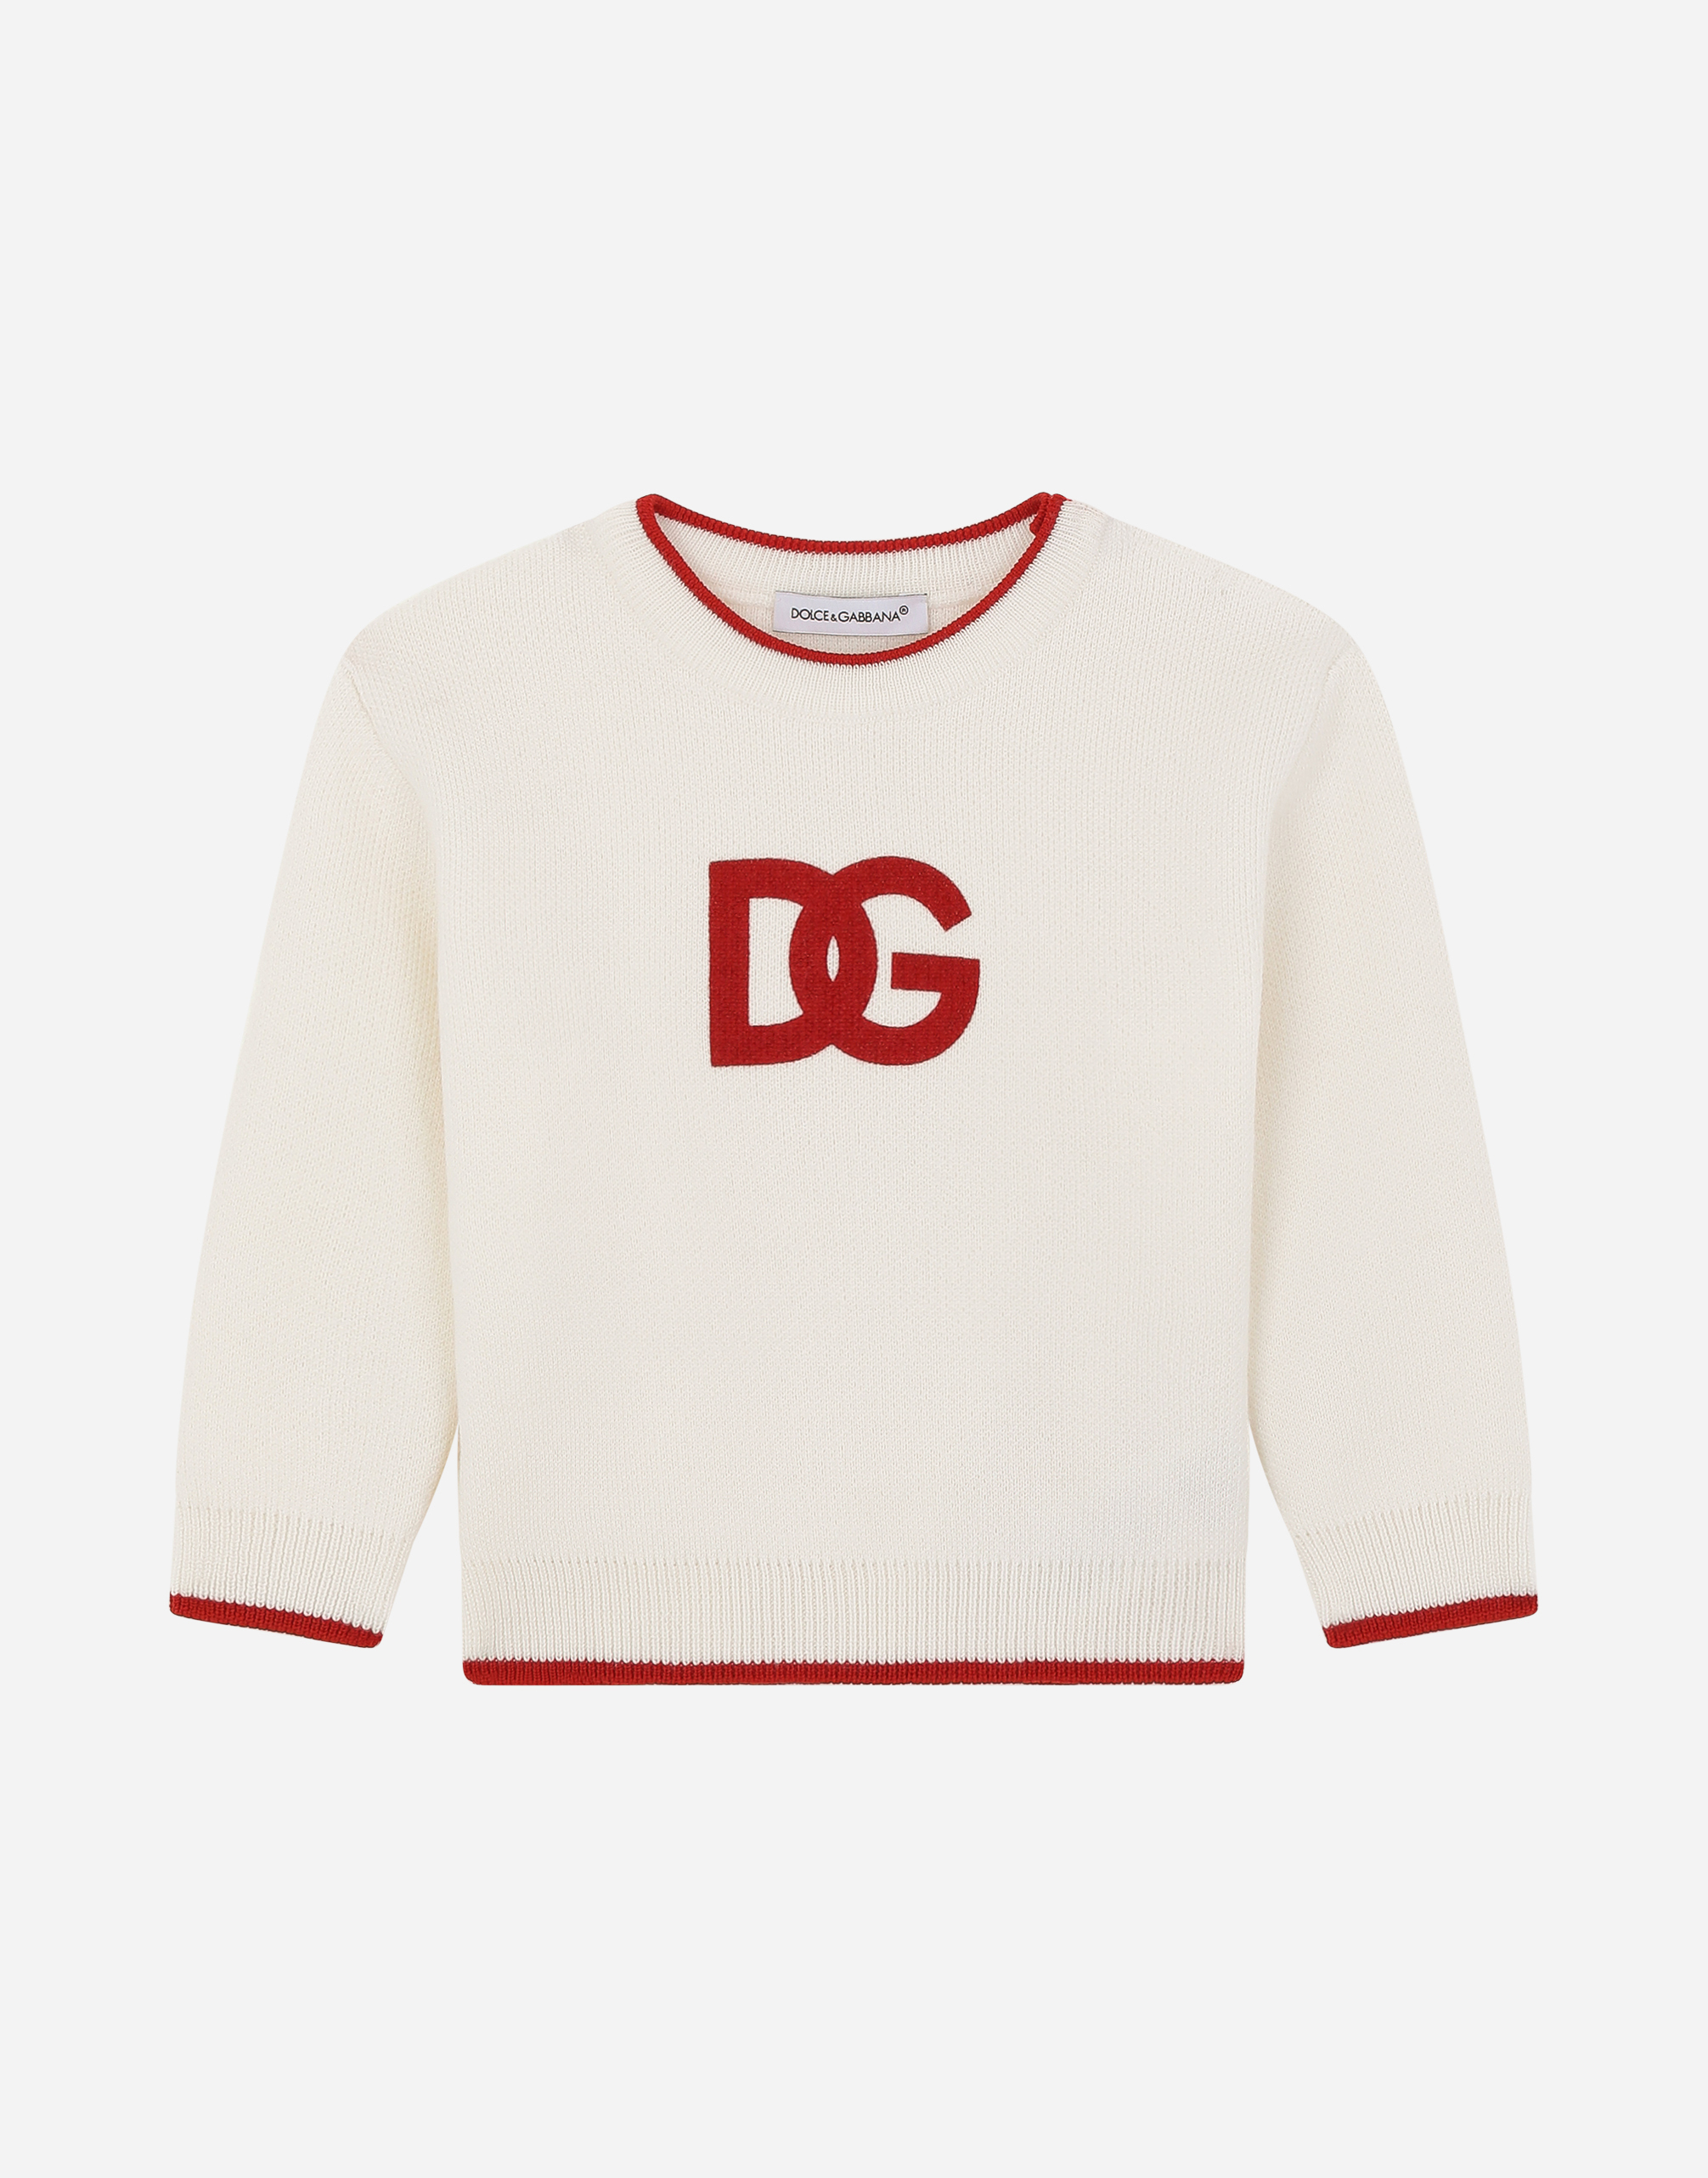 Round-neck sweater with jacquard DG logo in Multicolor